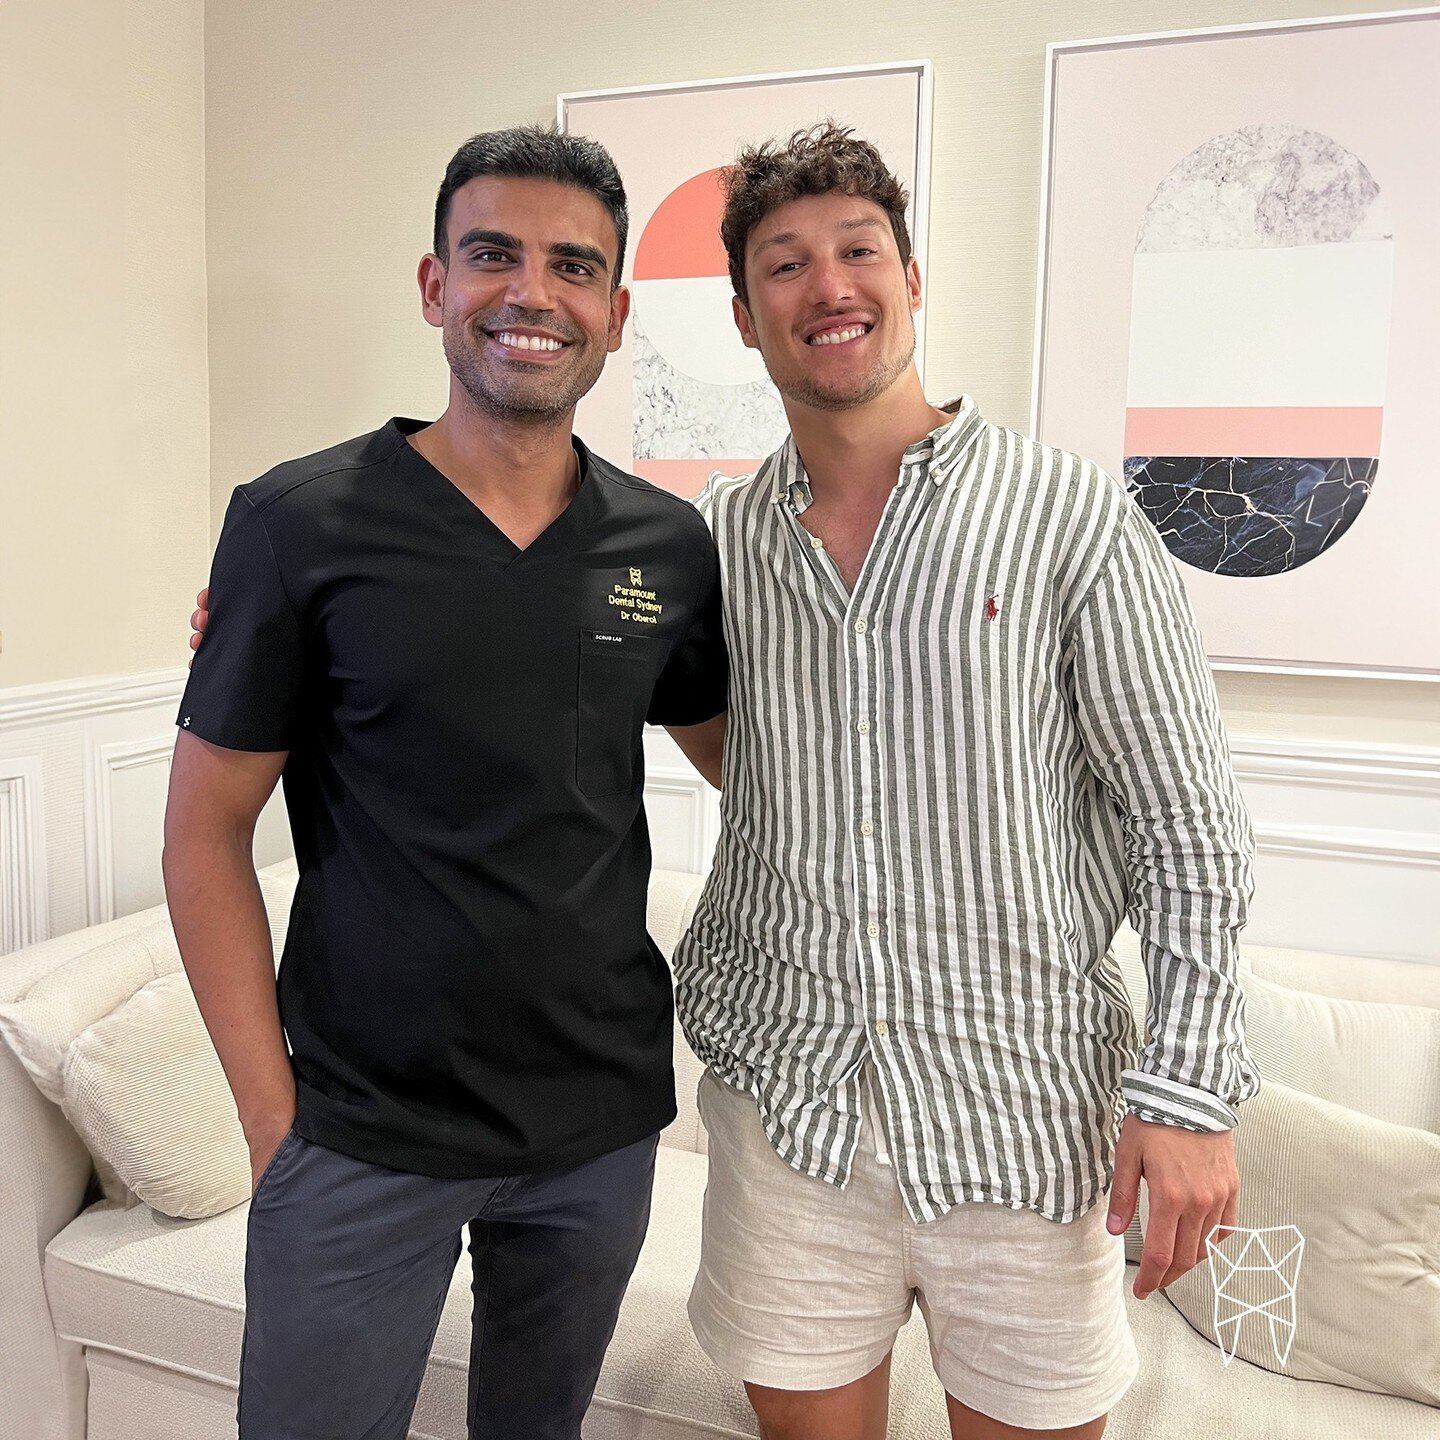 Thank you for stopping by @dodo_up 😁 ⁠Looking great after a post composite bonding work from @dr__amrin 🦷✨️⁠
⁠
Be sure to checkout Dom's before and after in our smile gallery:⁠
👉🏽 #linkinbio or bit.ly/SMILEparamount⁠
⁠
Considering a Smile Makeove